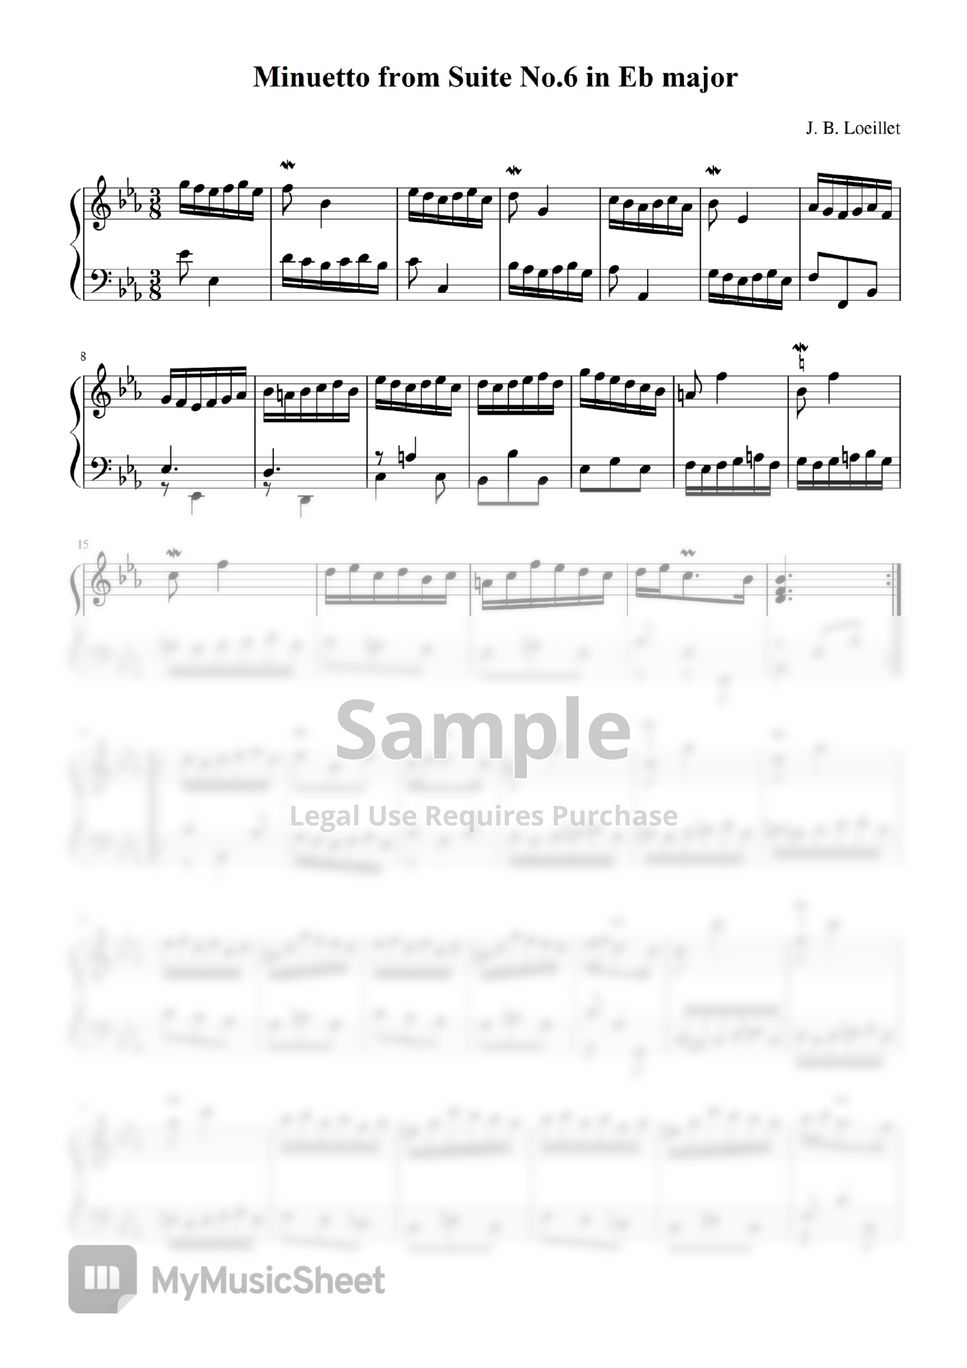 J. B. Loeillet - Minuetto from Suite No.6 in Eb major Sheets